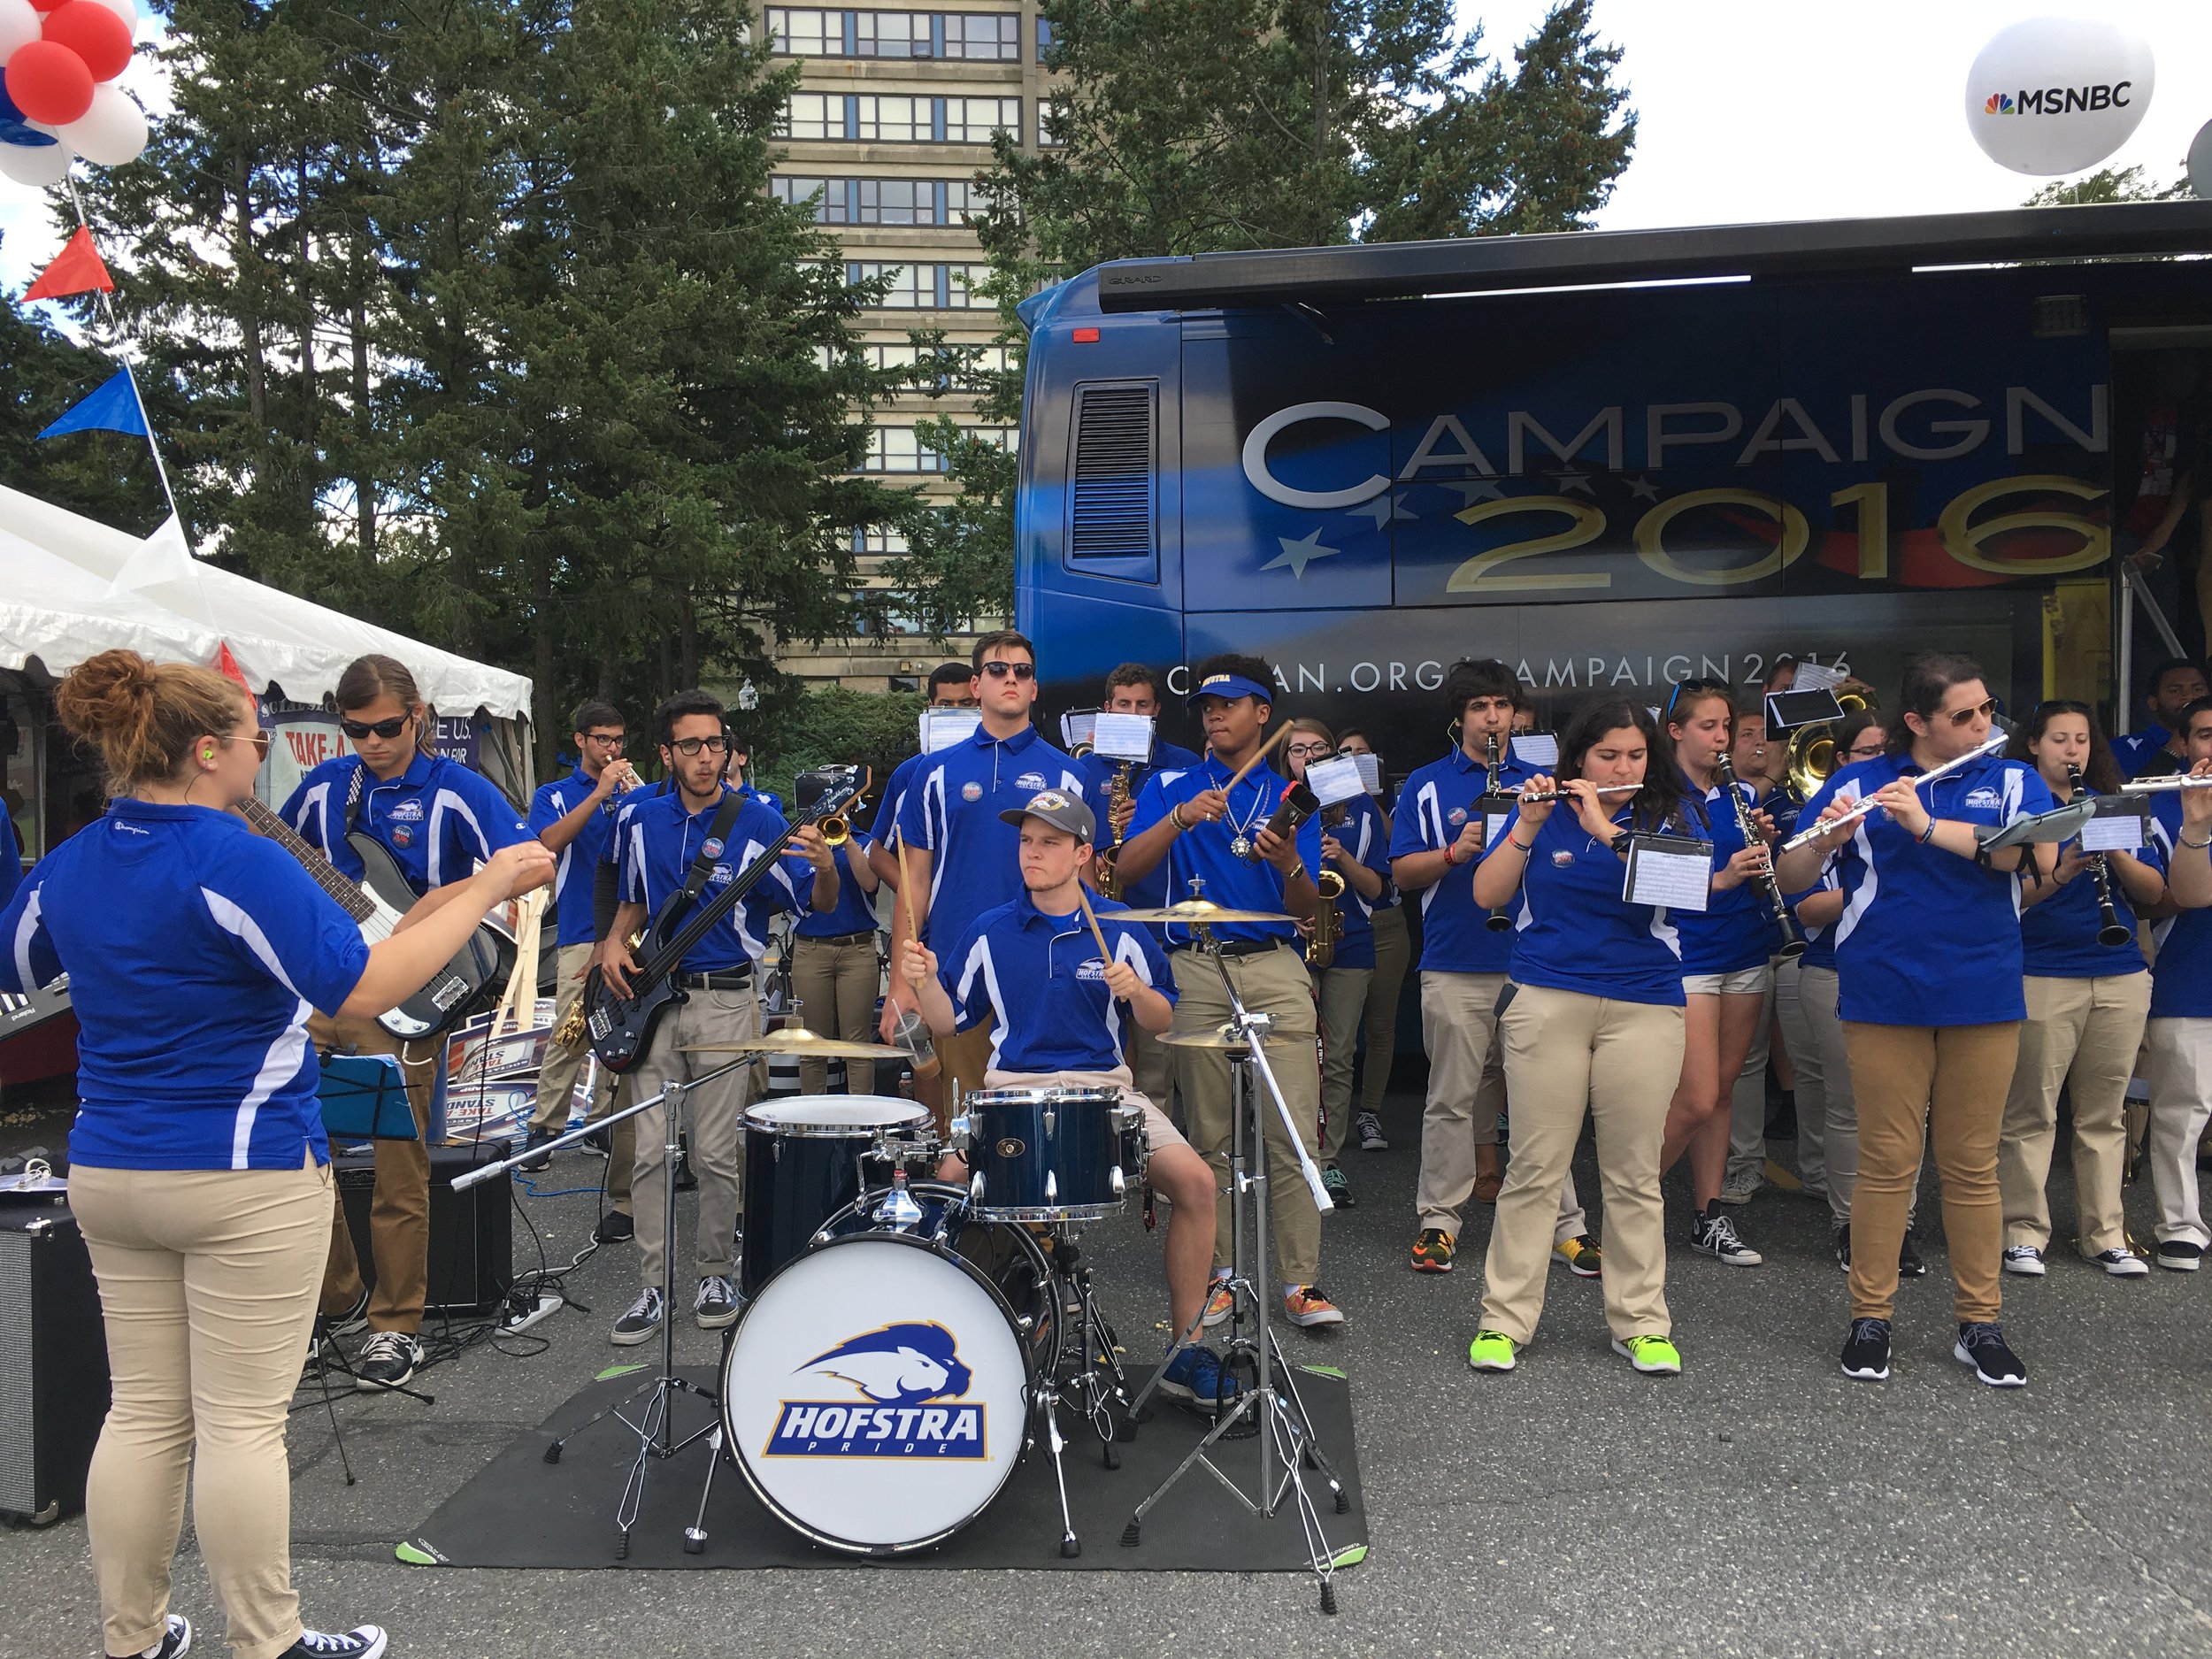 The pep band plays at soccer games, basketball games and other university events throughout the year. (Photo courtesy of Samantha Filippone)